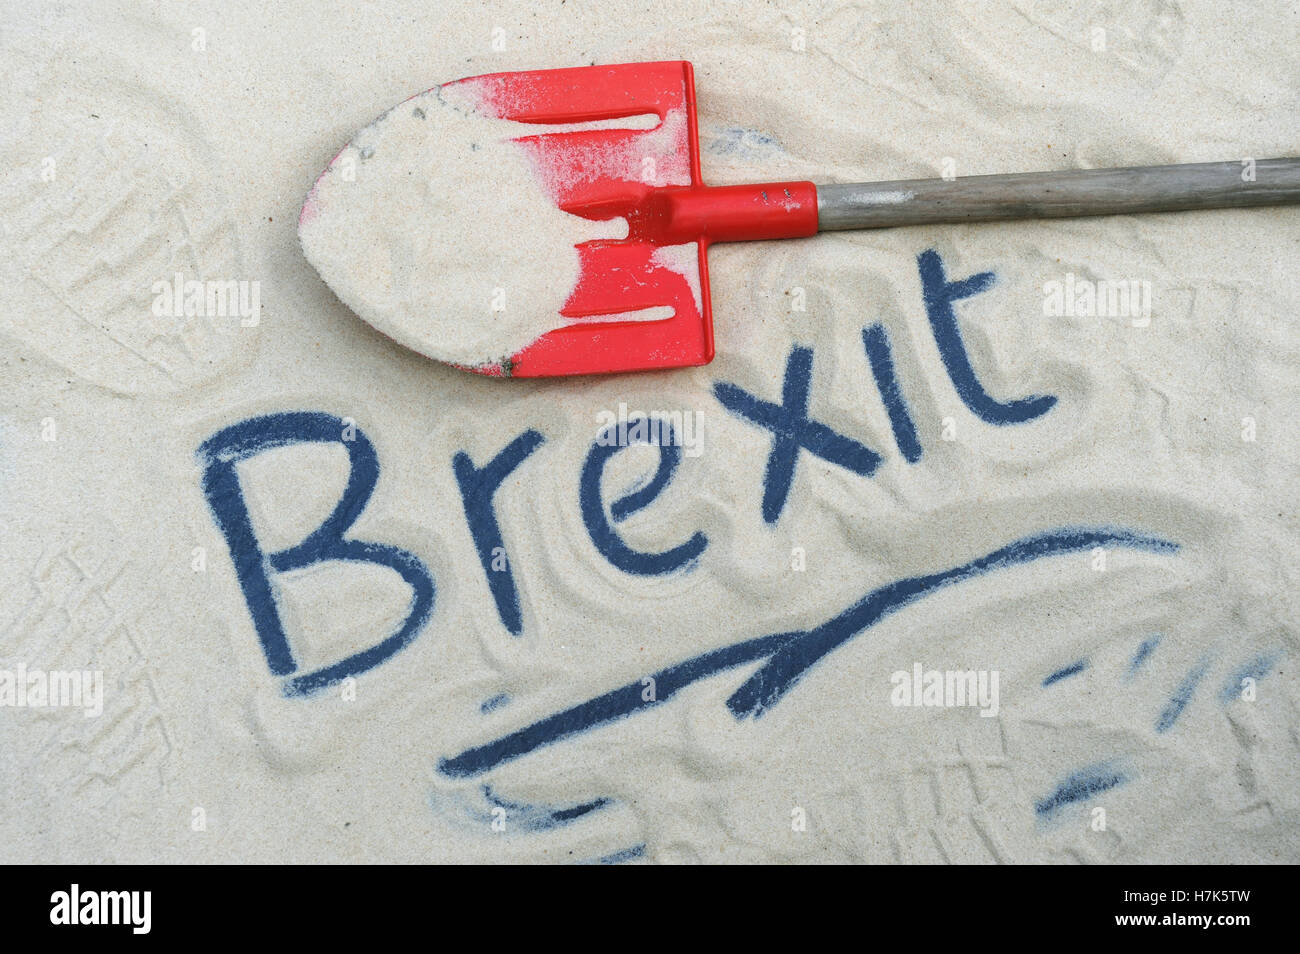 BREXIT WORD WRITTEN IN SAND WITH RED SPADE RE BREXIT THE EUROPEAN UNION REFERENDUM EU LEAVING INVOKE ARTICLE 50 UK Stock Photo